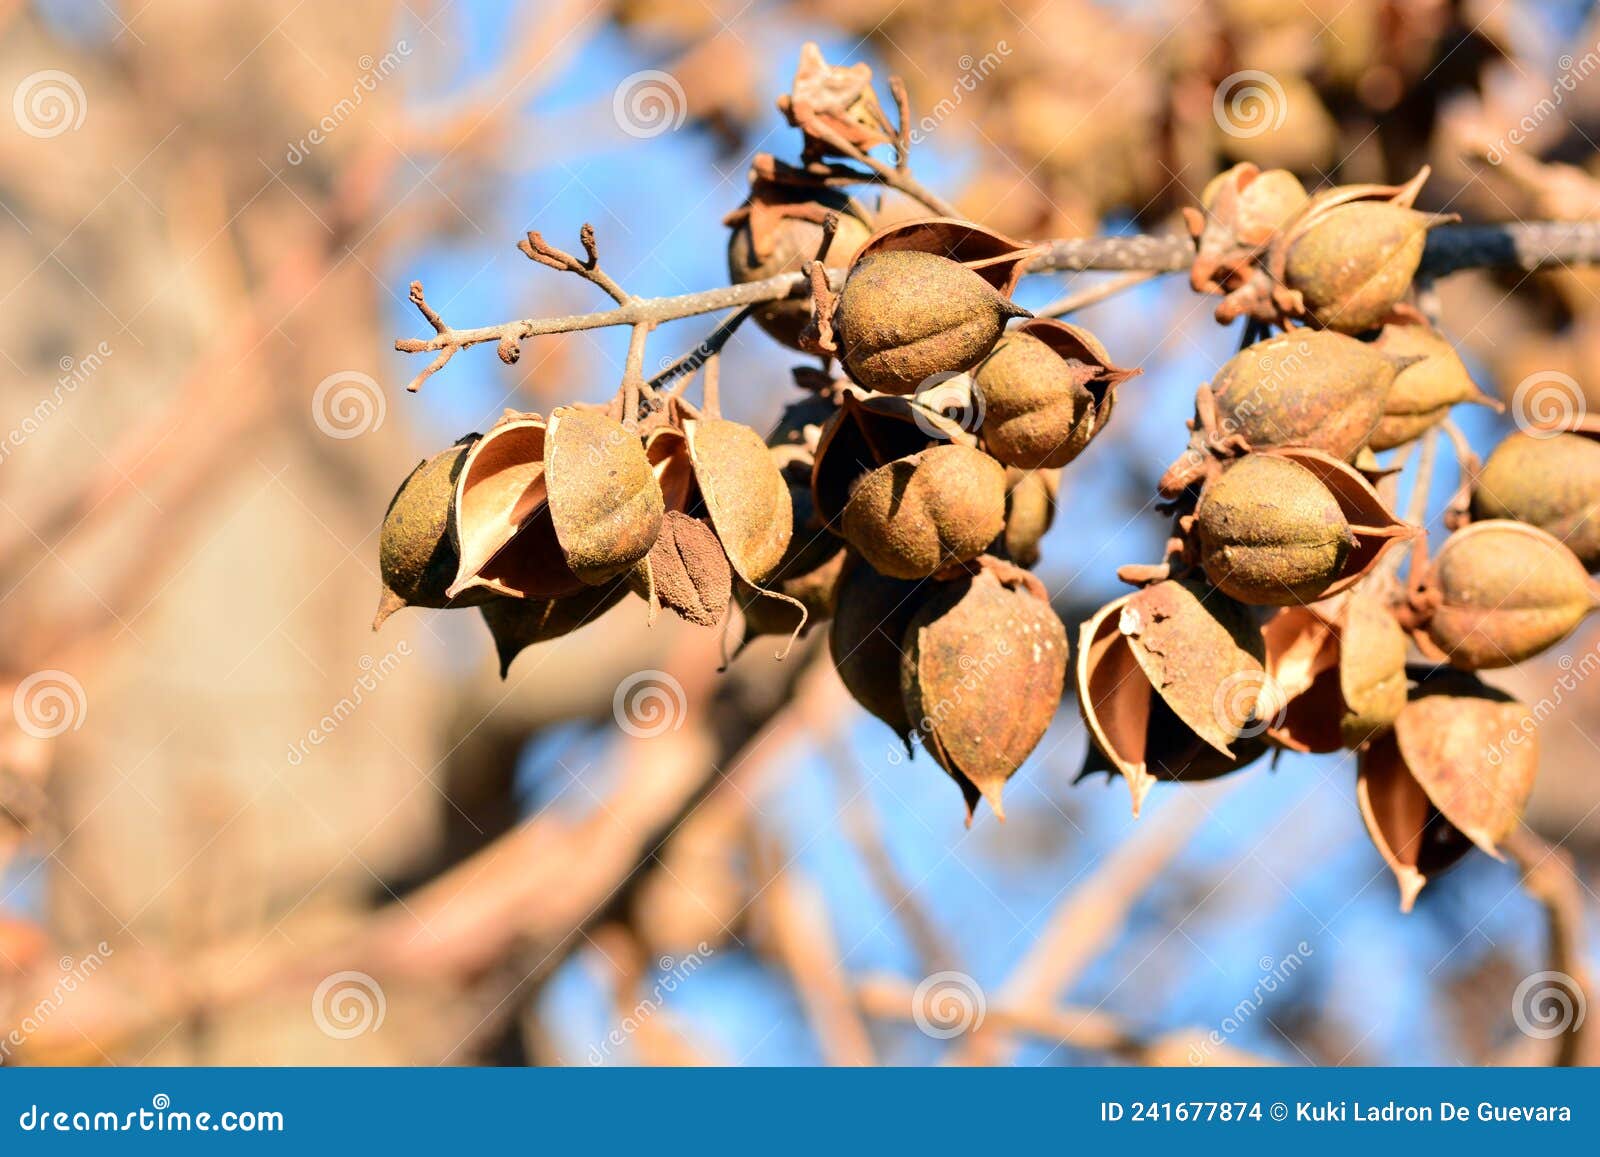 open bolls on the branches of a paulownia tomentosa